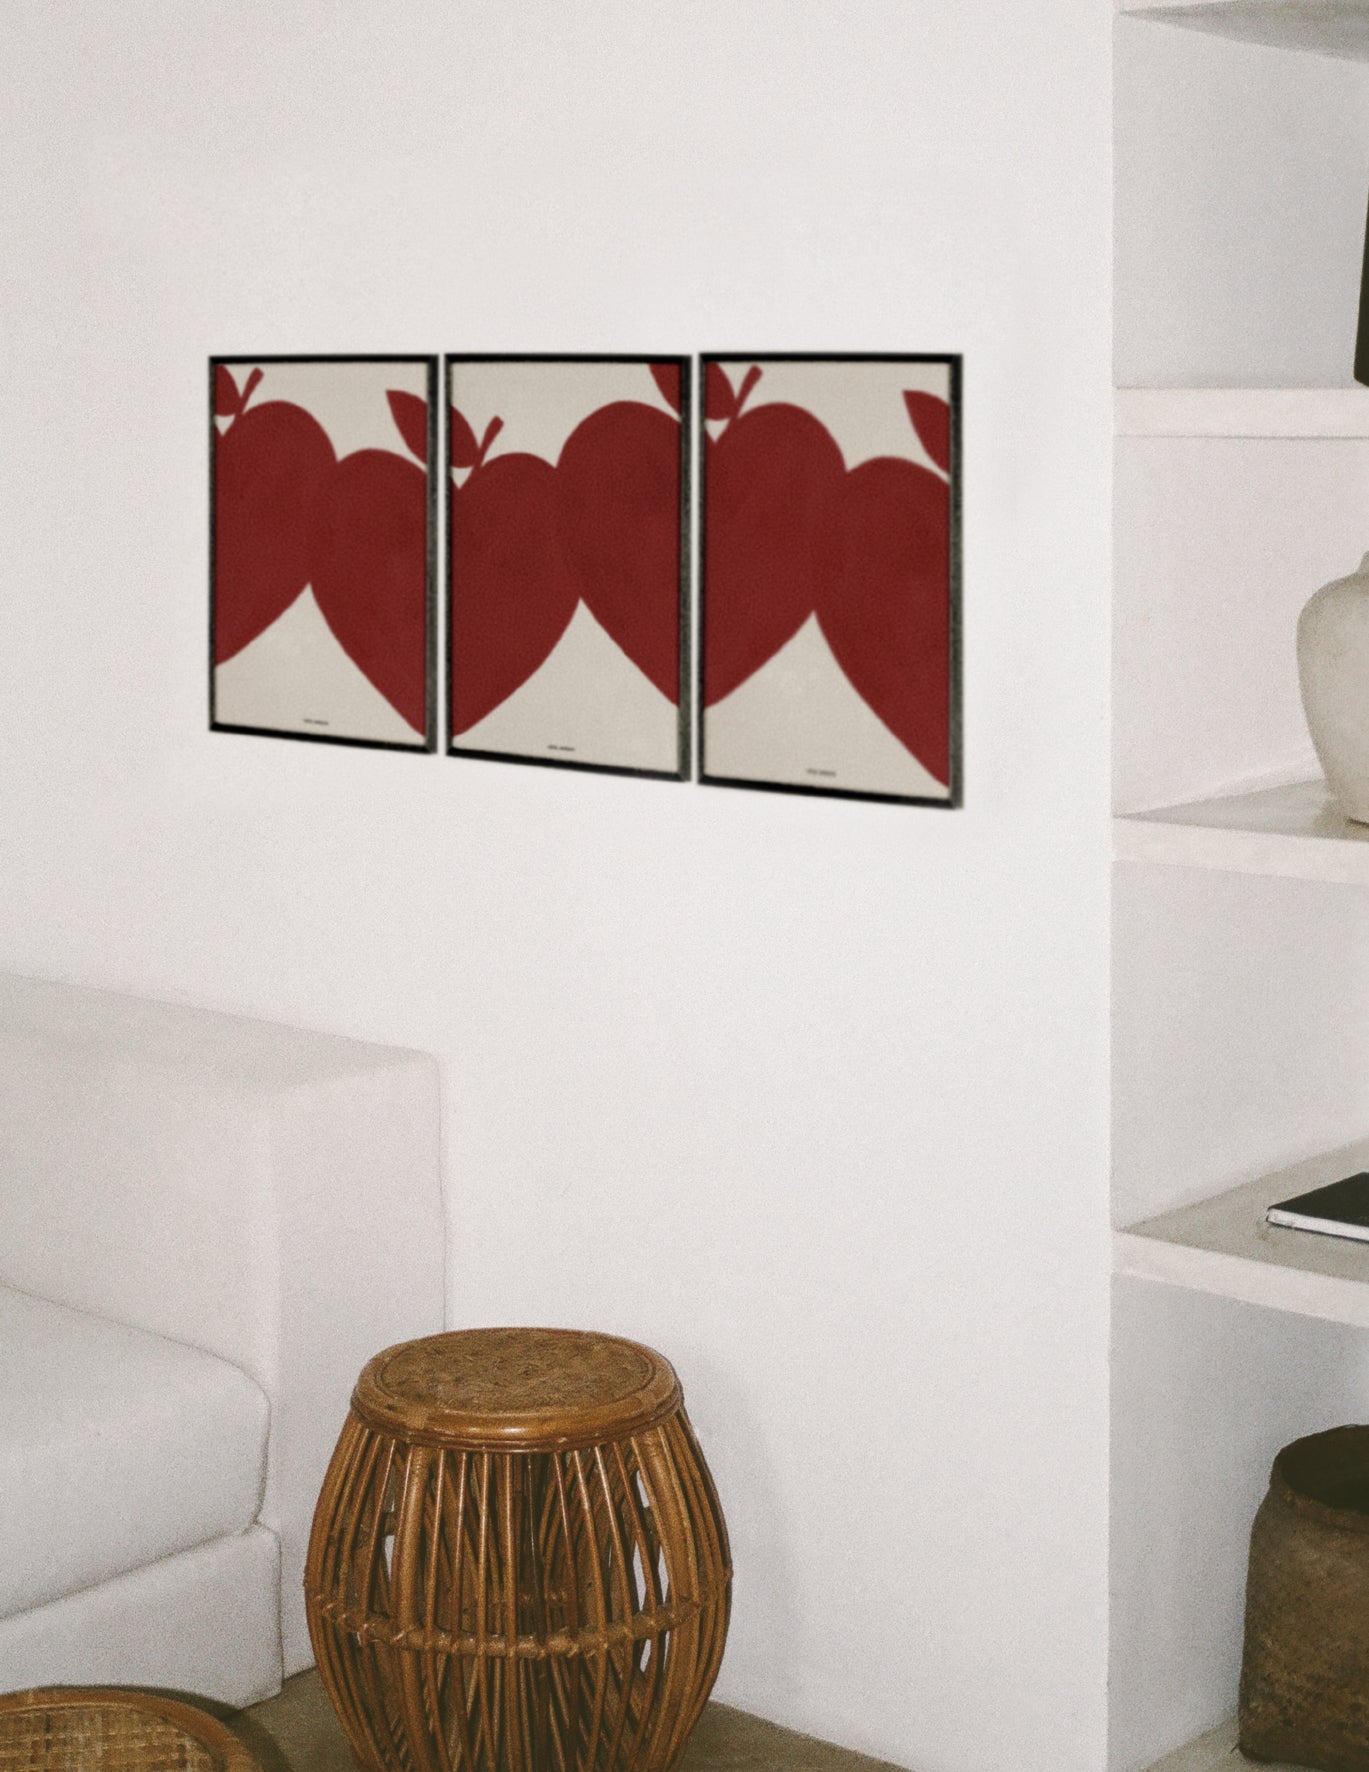 Magique in a red row of three art print by Hôtel Magique framed red hearts painted home deco wall art home interior design